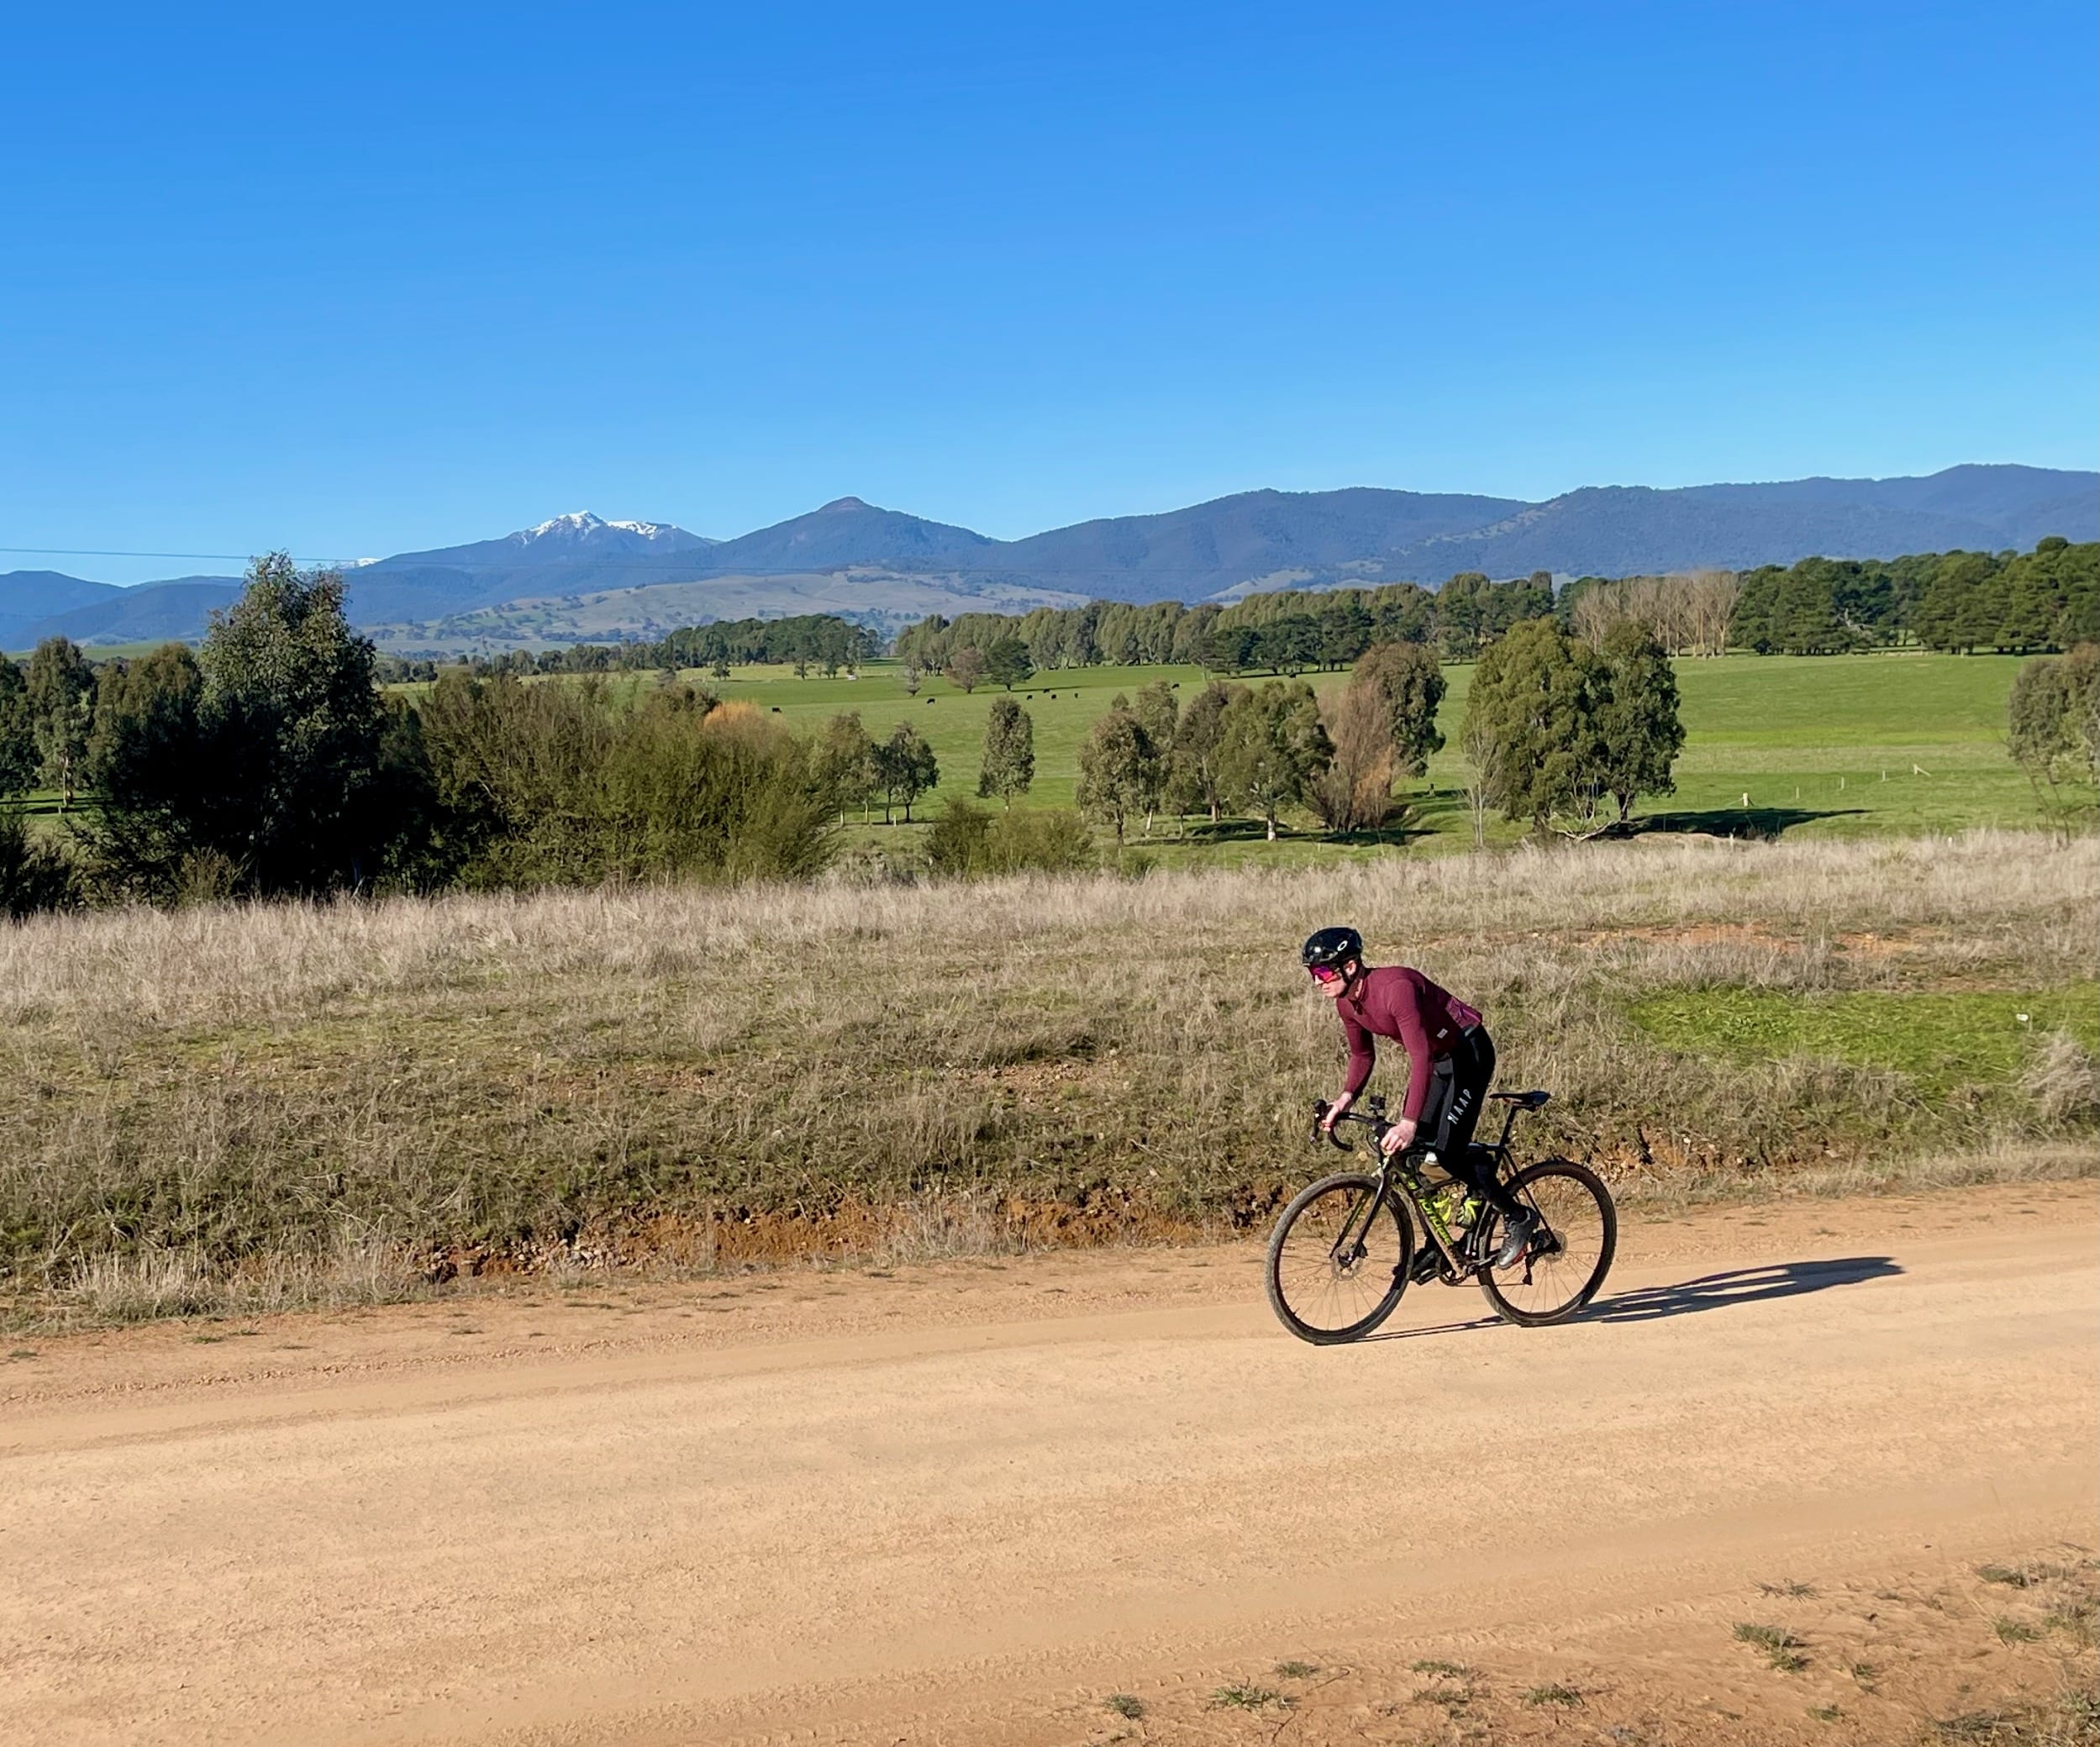 Cyclist riding on a smooth gravel road through open farmland and snow capped moutains in the background on a sunny day